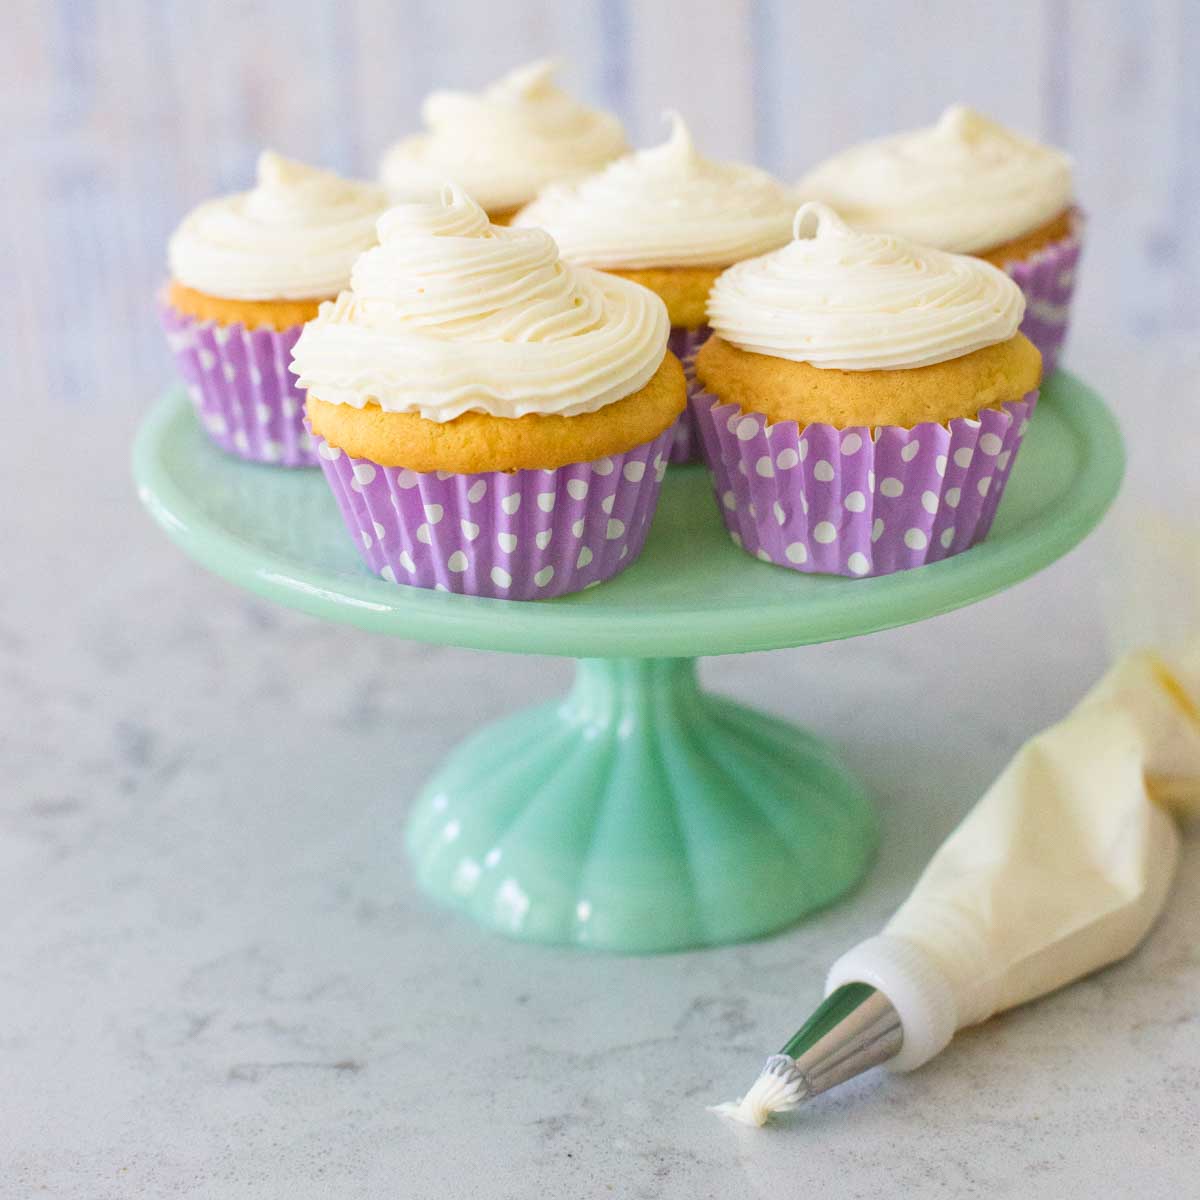 Vanilla cupcakes have been topped with a swirl of cream cheese frosting and sit on a cake plate. There's a frosting piping bag on the counter in front.